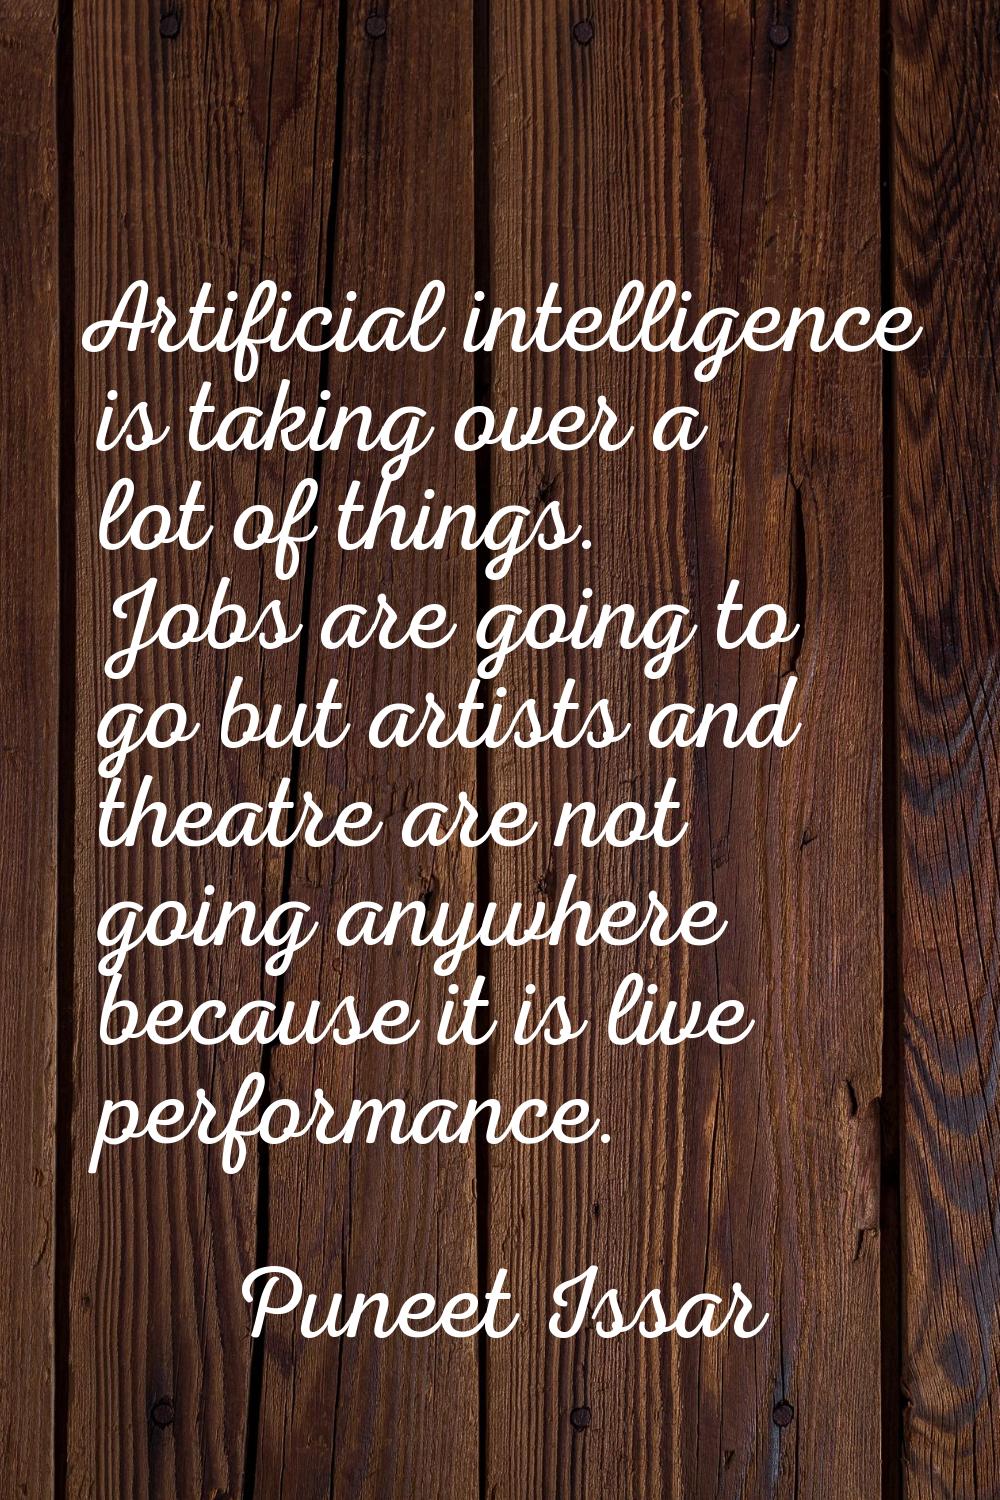 Artificial intelligence is taking over a lot of things. Jobs are going to go but artists and theatr